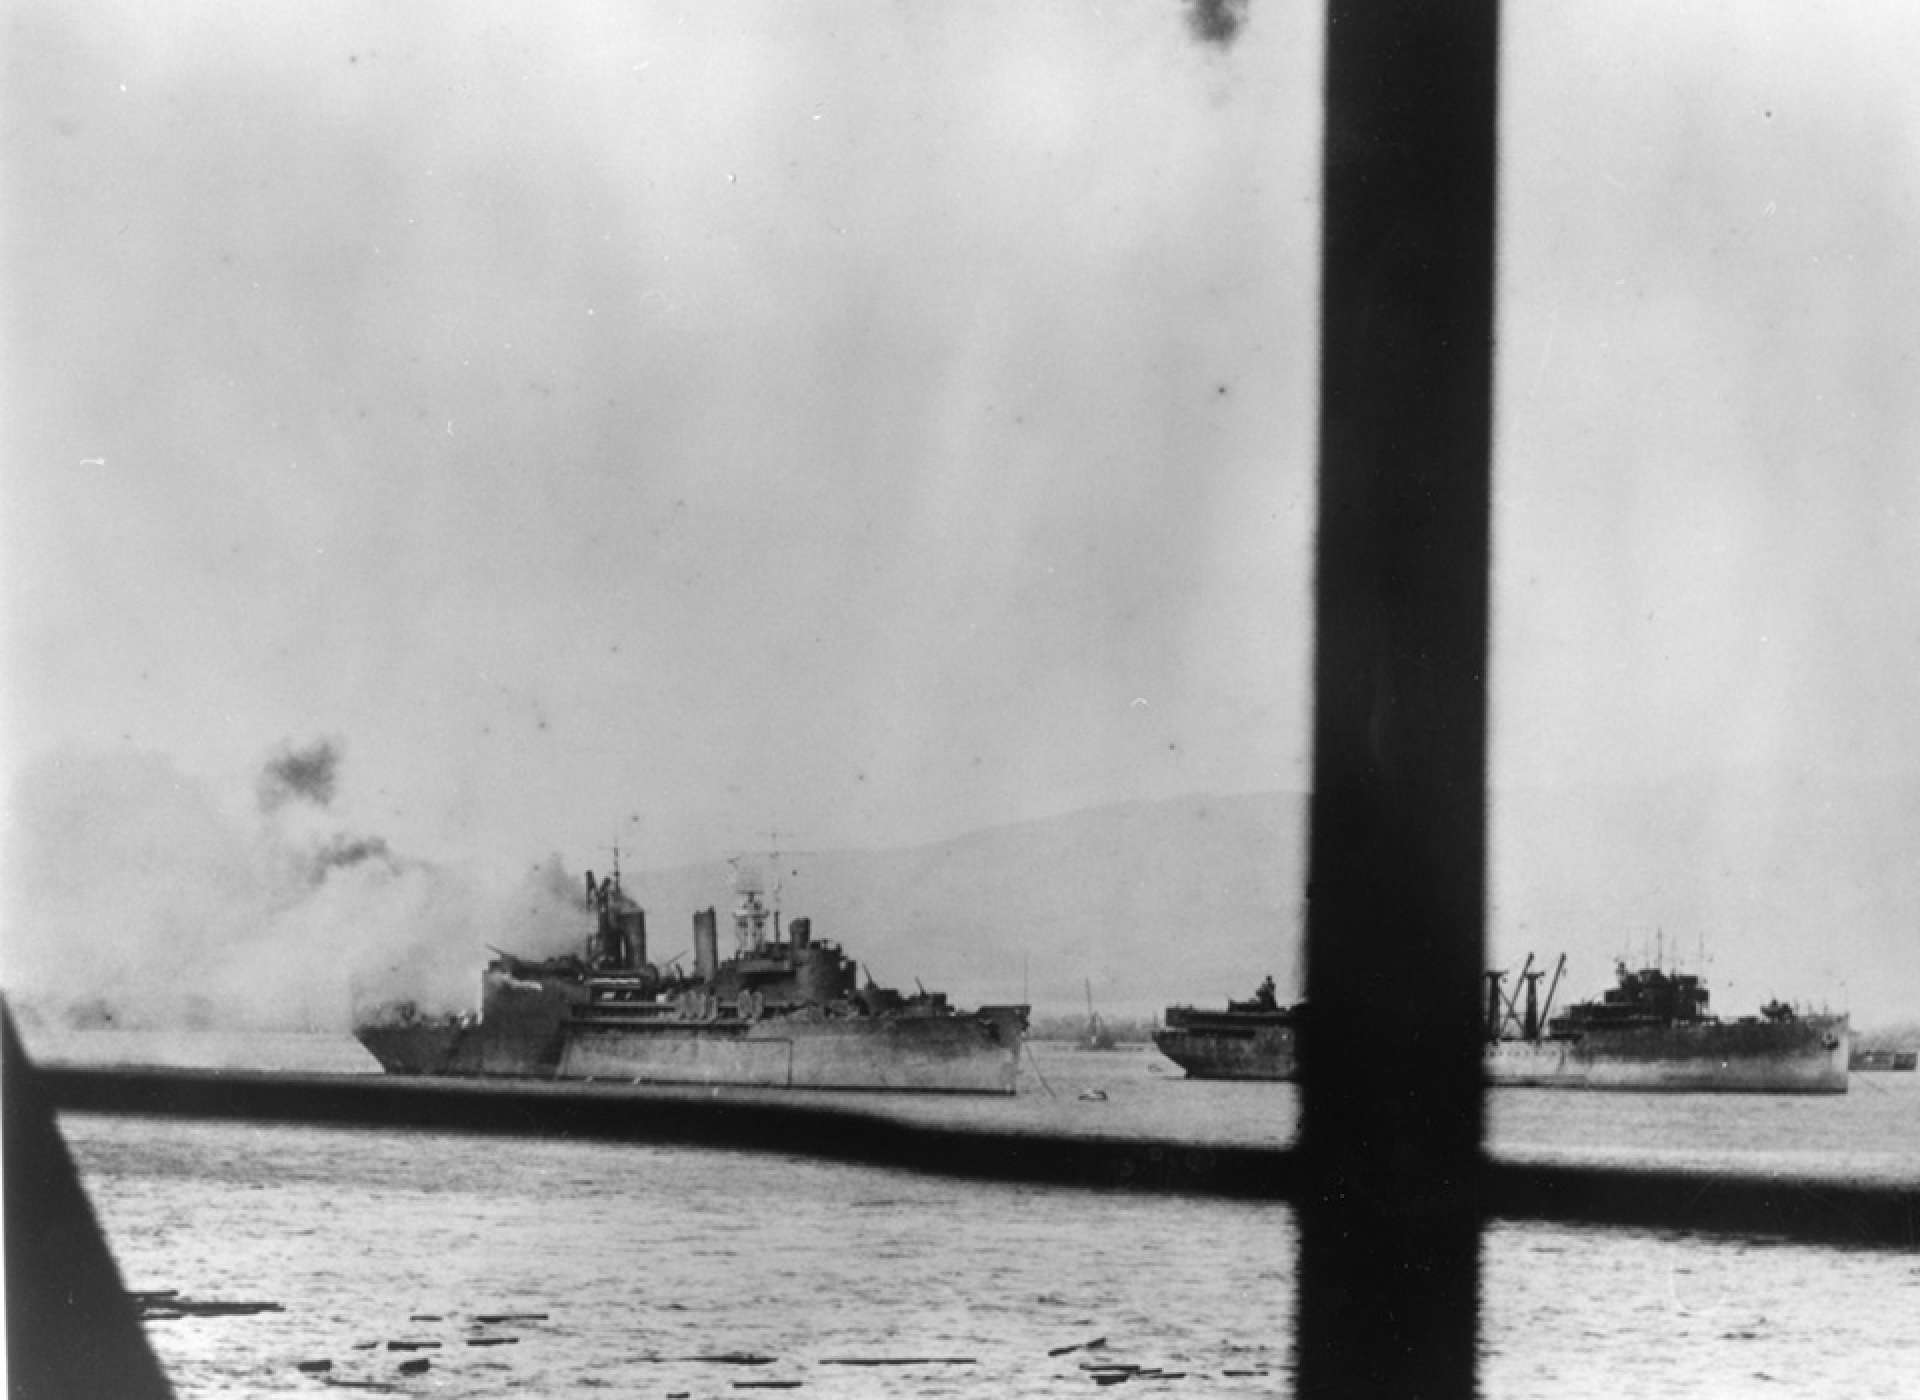 USS Curtiss (AV-4) is seen burning from a bomb hit at anchor in Pearl Harbor on December 7, 1941